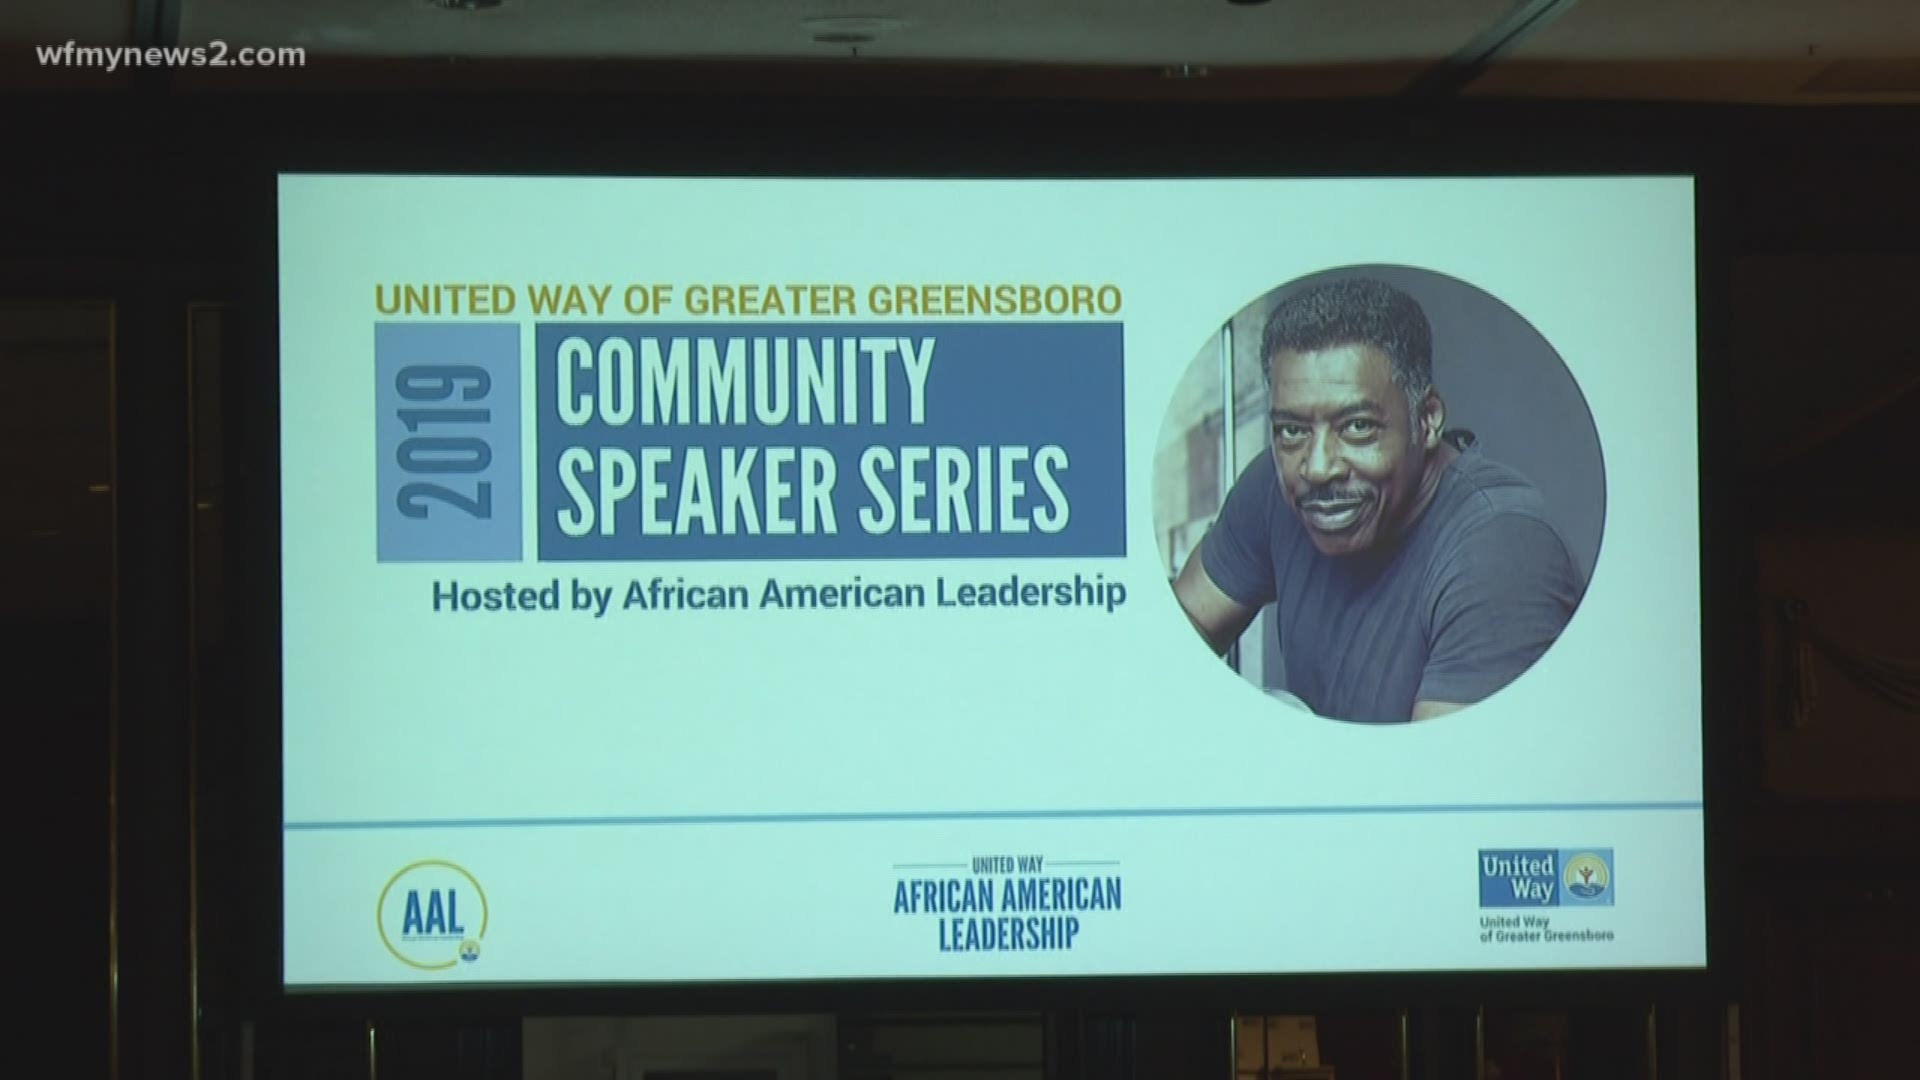 Hollywood actor and Ghostbusters star, Ernie Hudson, made a stop in Greensboro today.  He shared his personal story of overcoming odds and adversity at the United Way of Greater Greensboro.